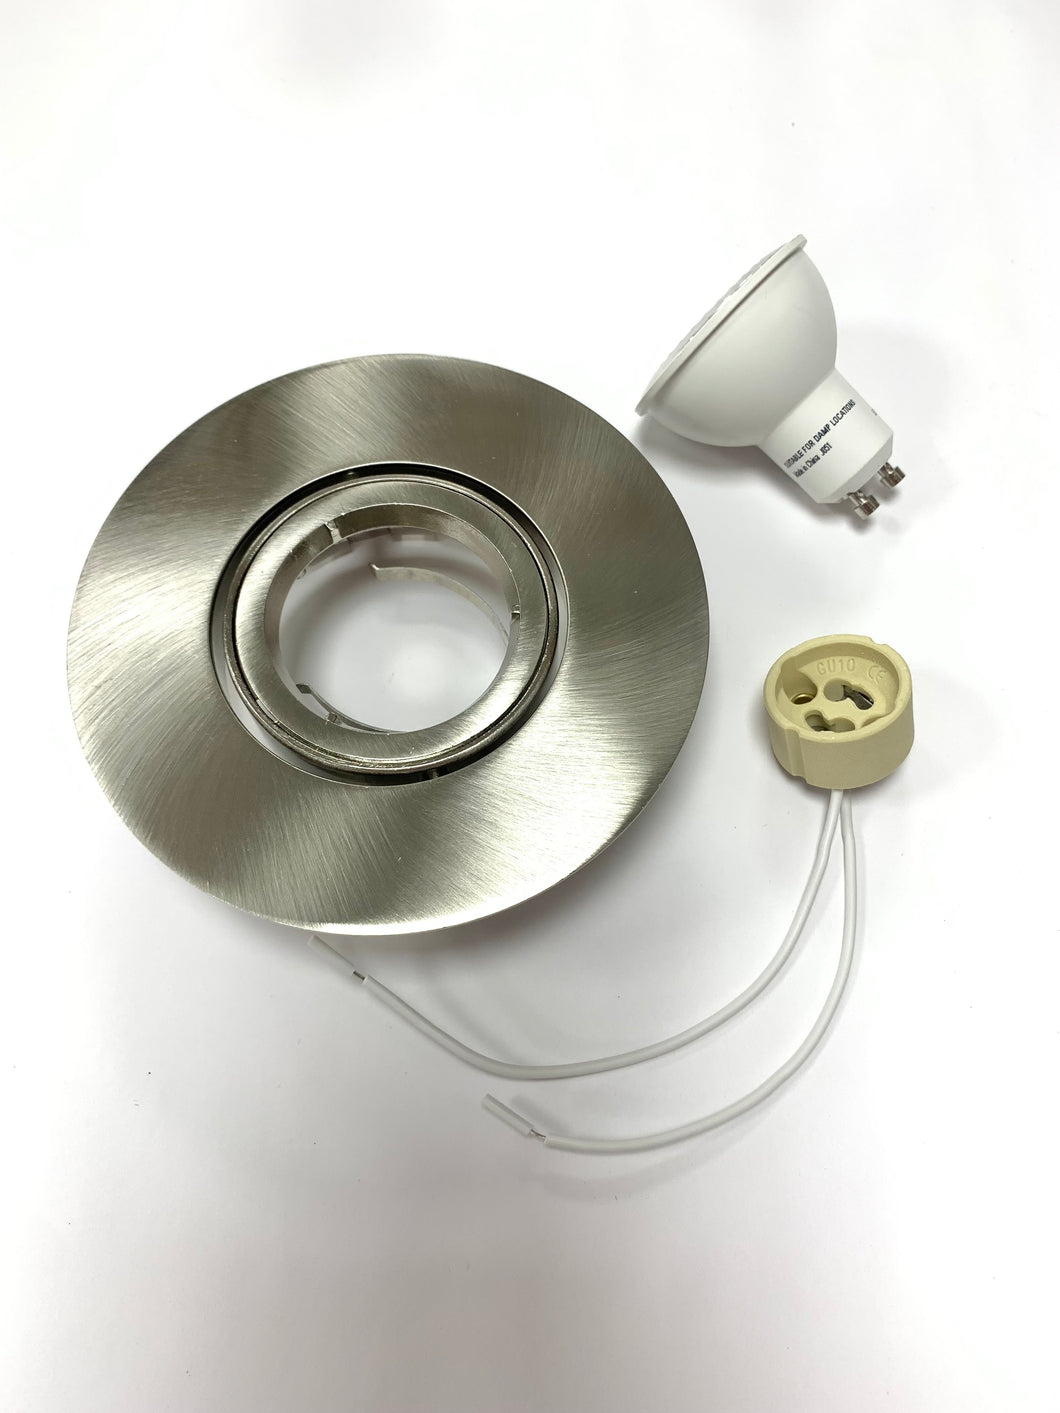 RECESSED LIGHTING FIXTURE KIT FOR CONCRETE - BRUSHED NICKEL FINISH – 4.5W / GU10 / WARM WHITE